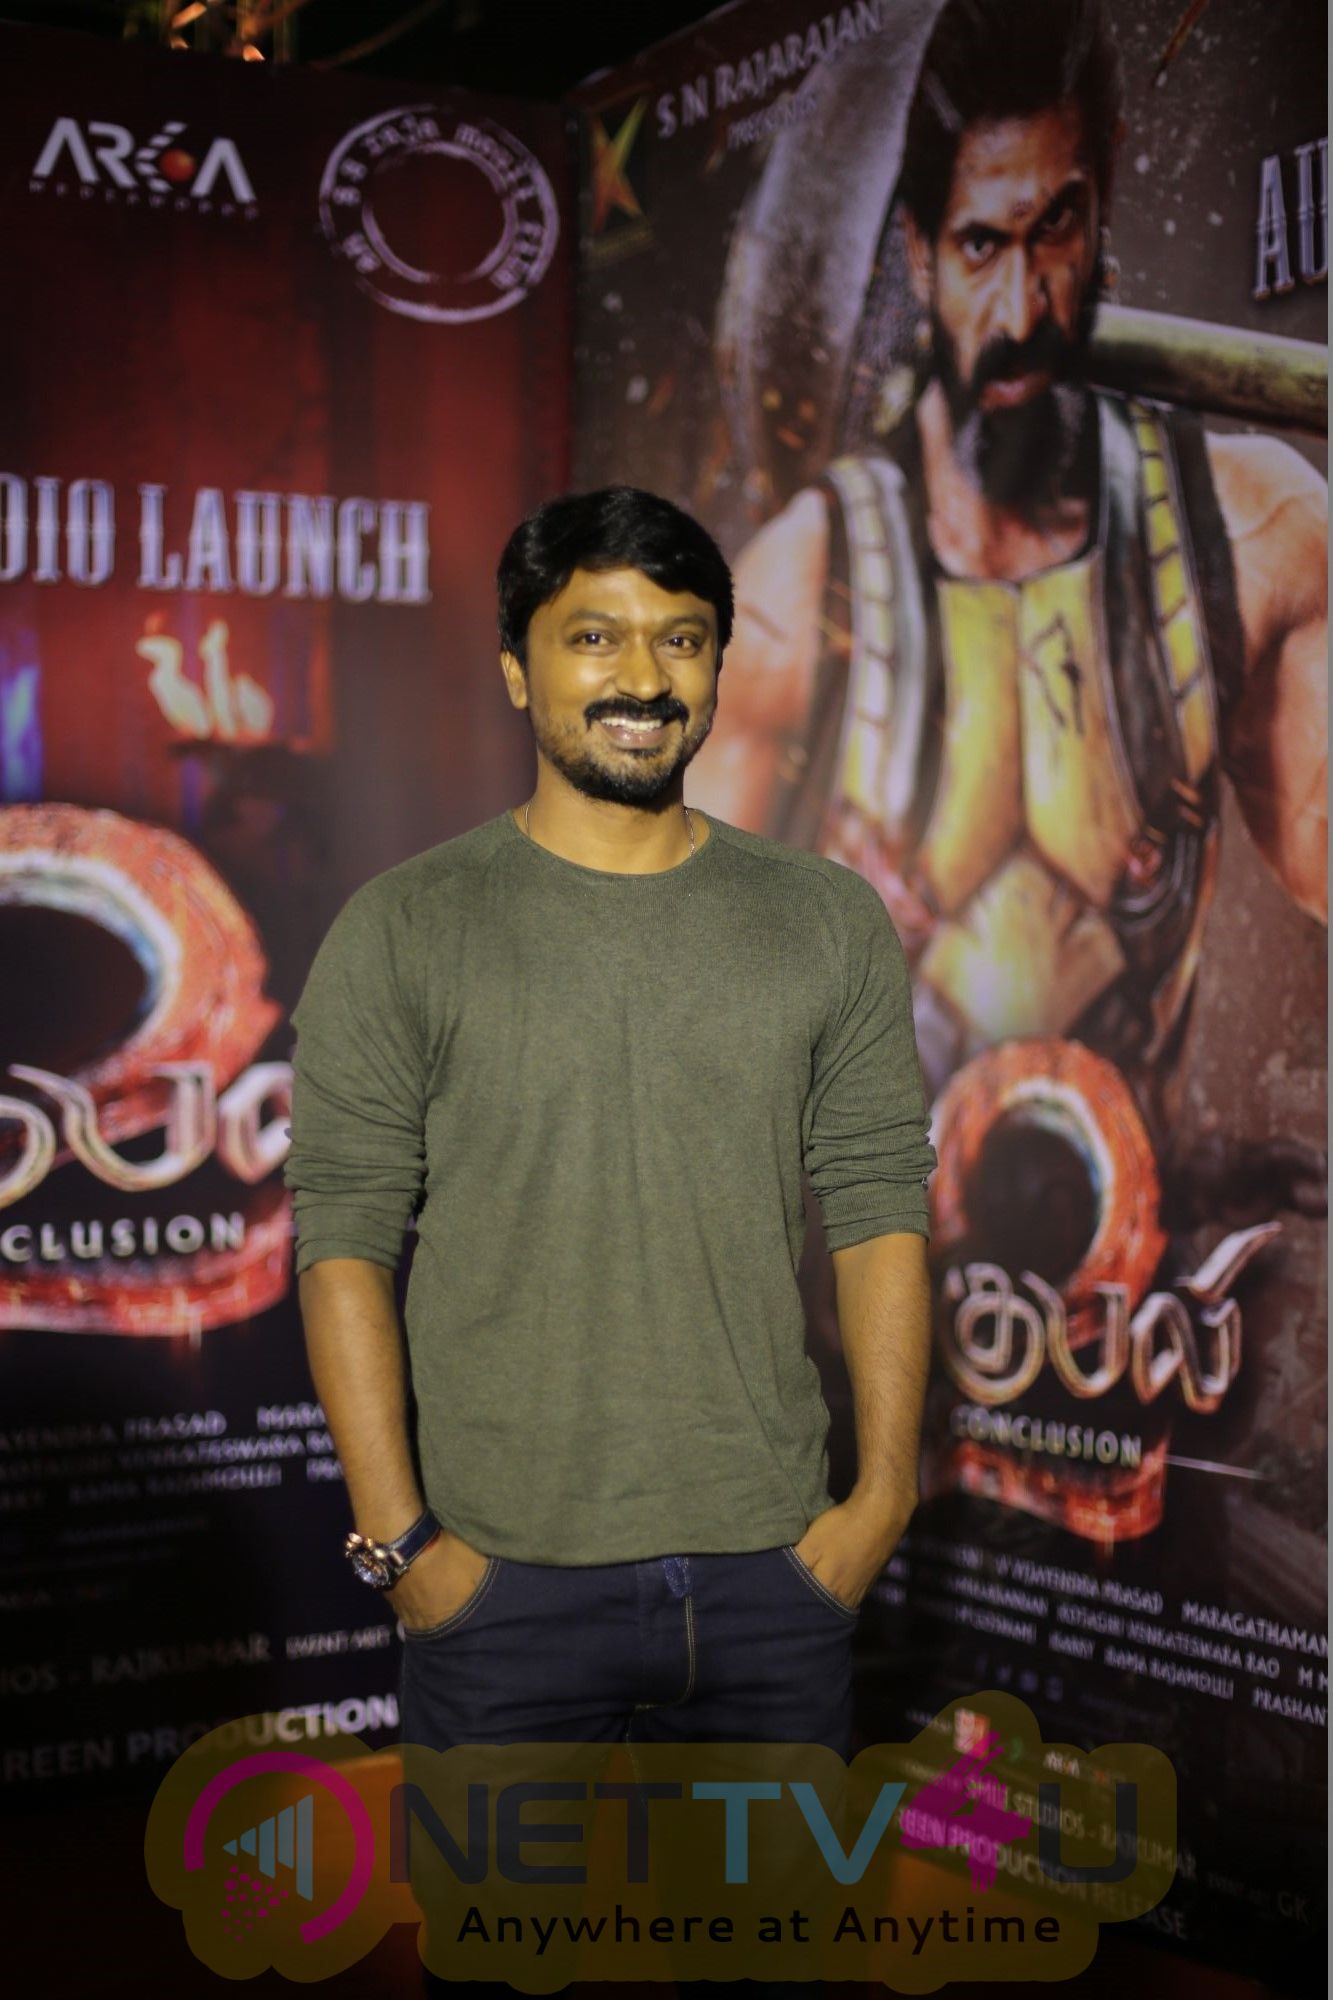 Bahubali 2 Tamil Movie Audio Launch Excellent Photos  Tamil Gallery